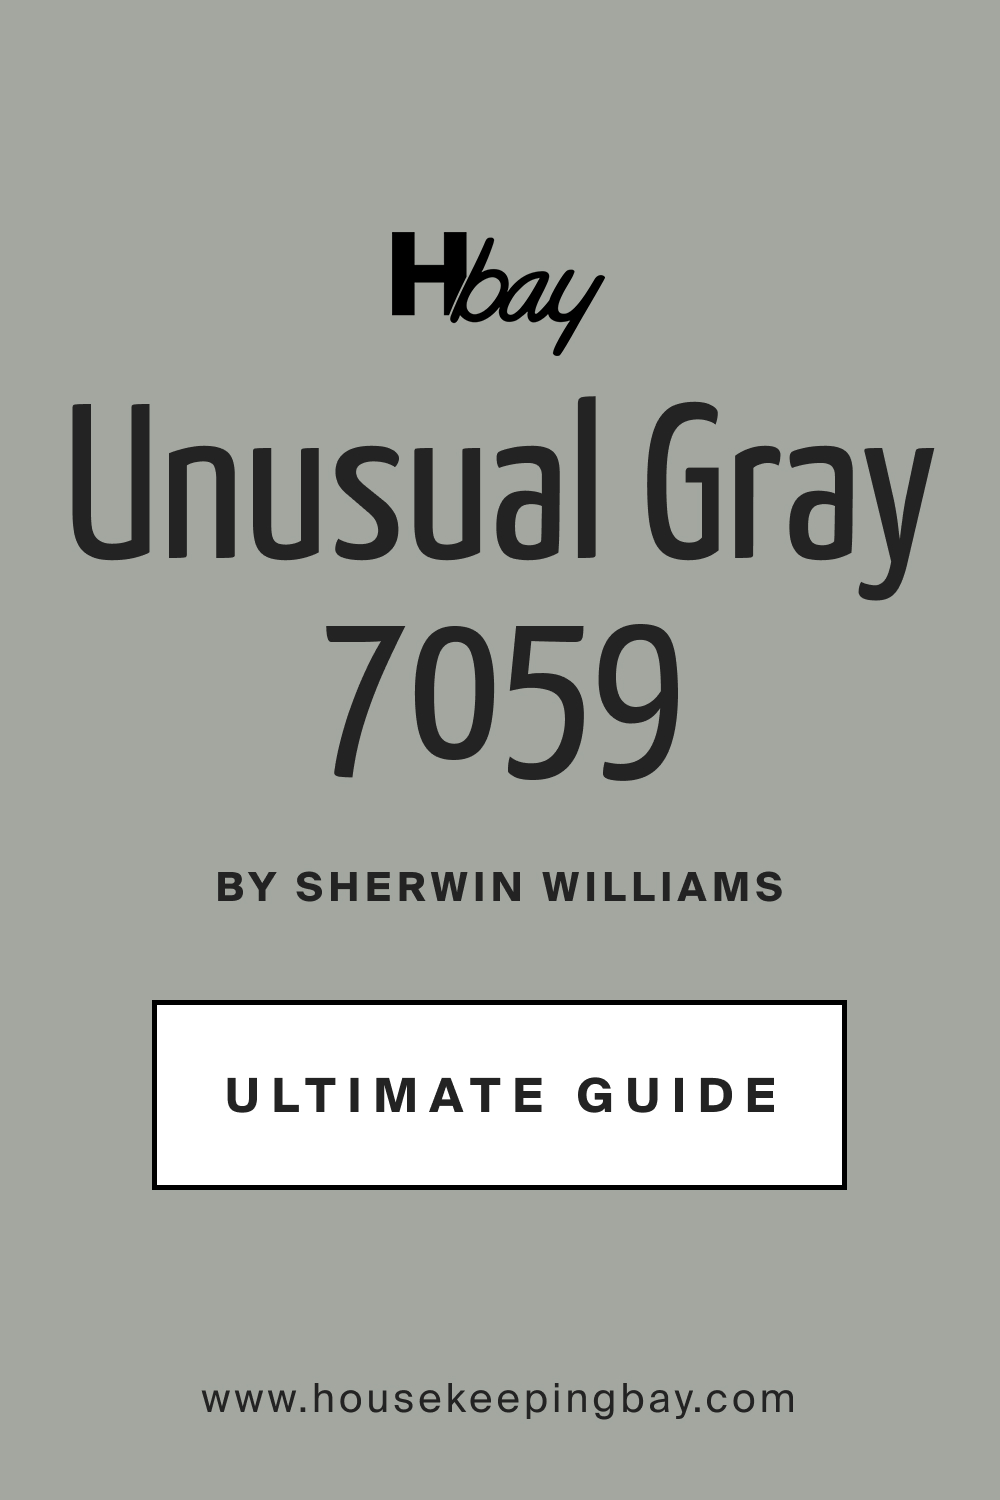 SW 7059 Unusual Gray by Sherwin Williams Ultimate Guide